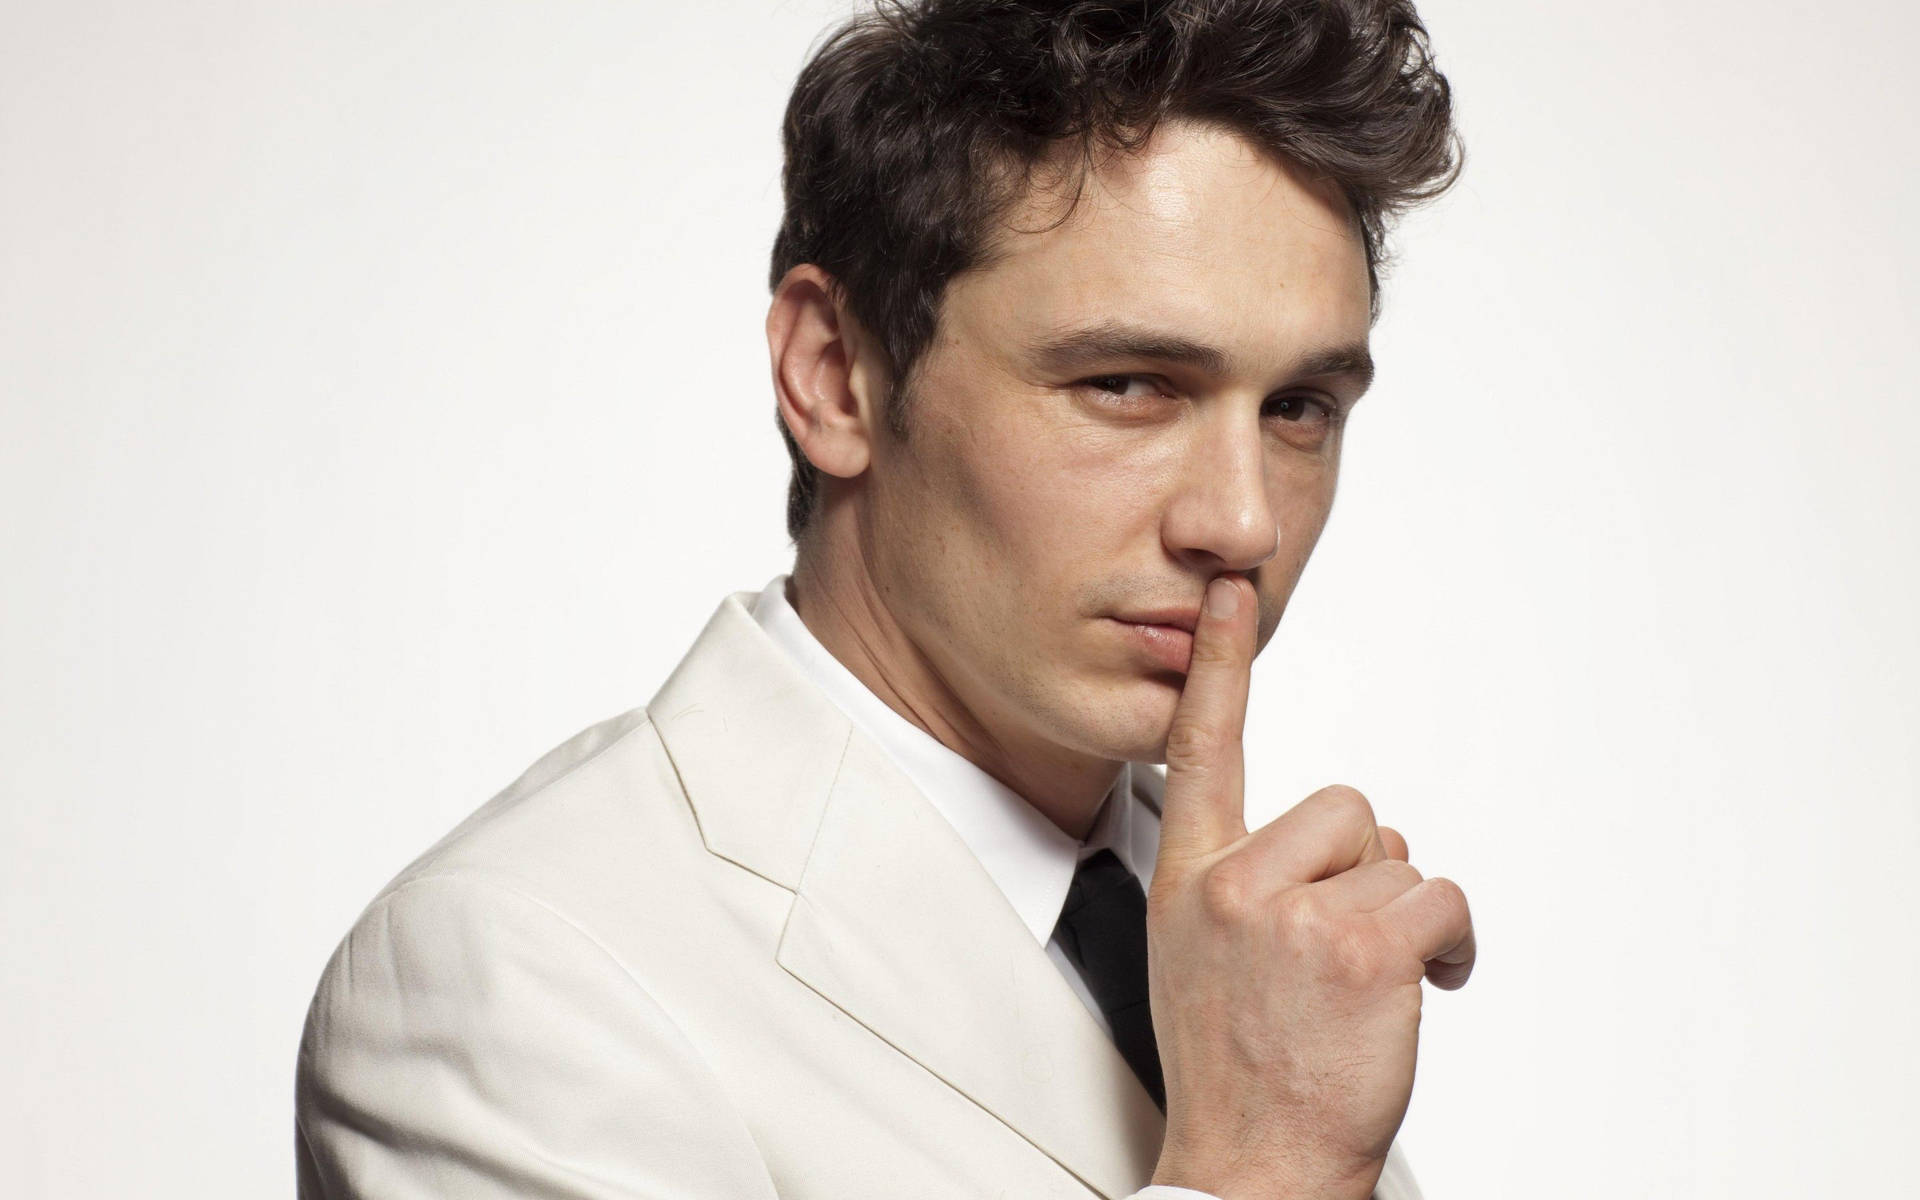 James Franco In White Suit Making A Silence Gesture Background